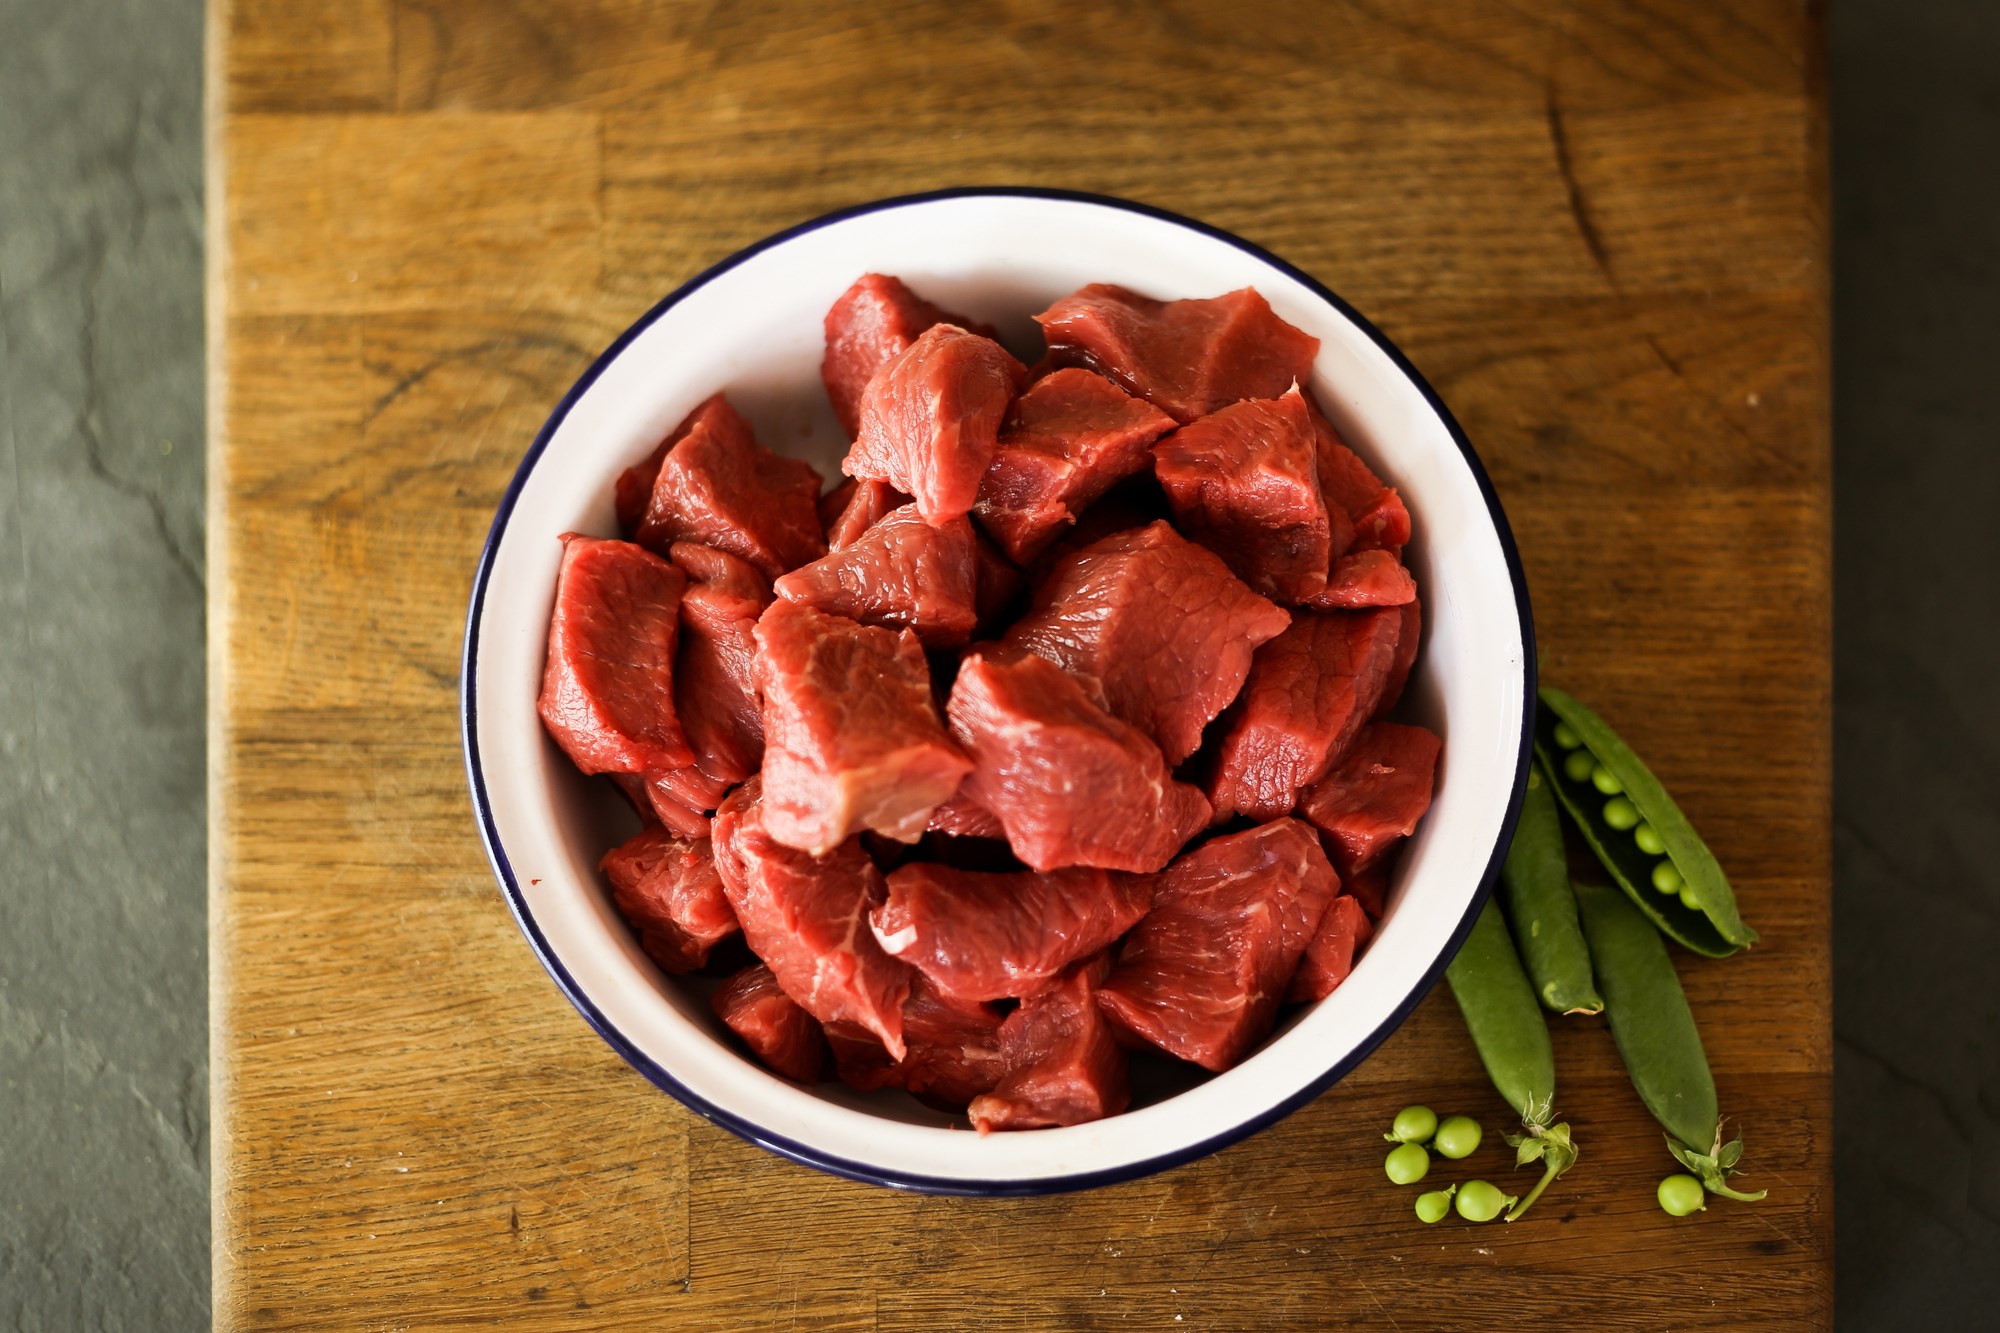 Diced Beef - 440g